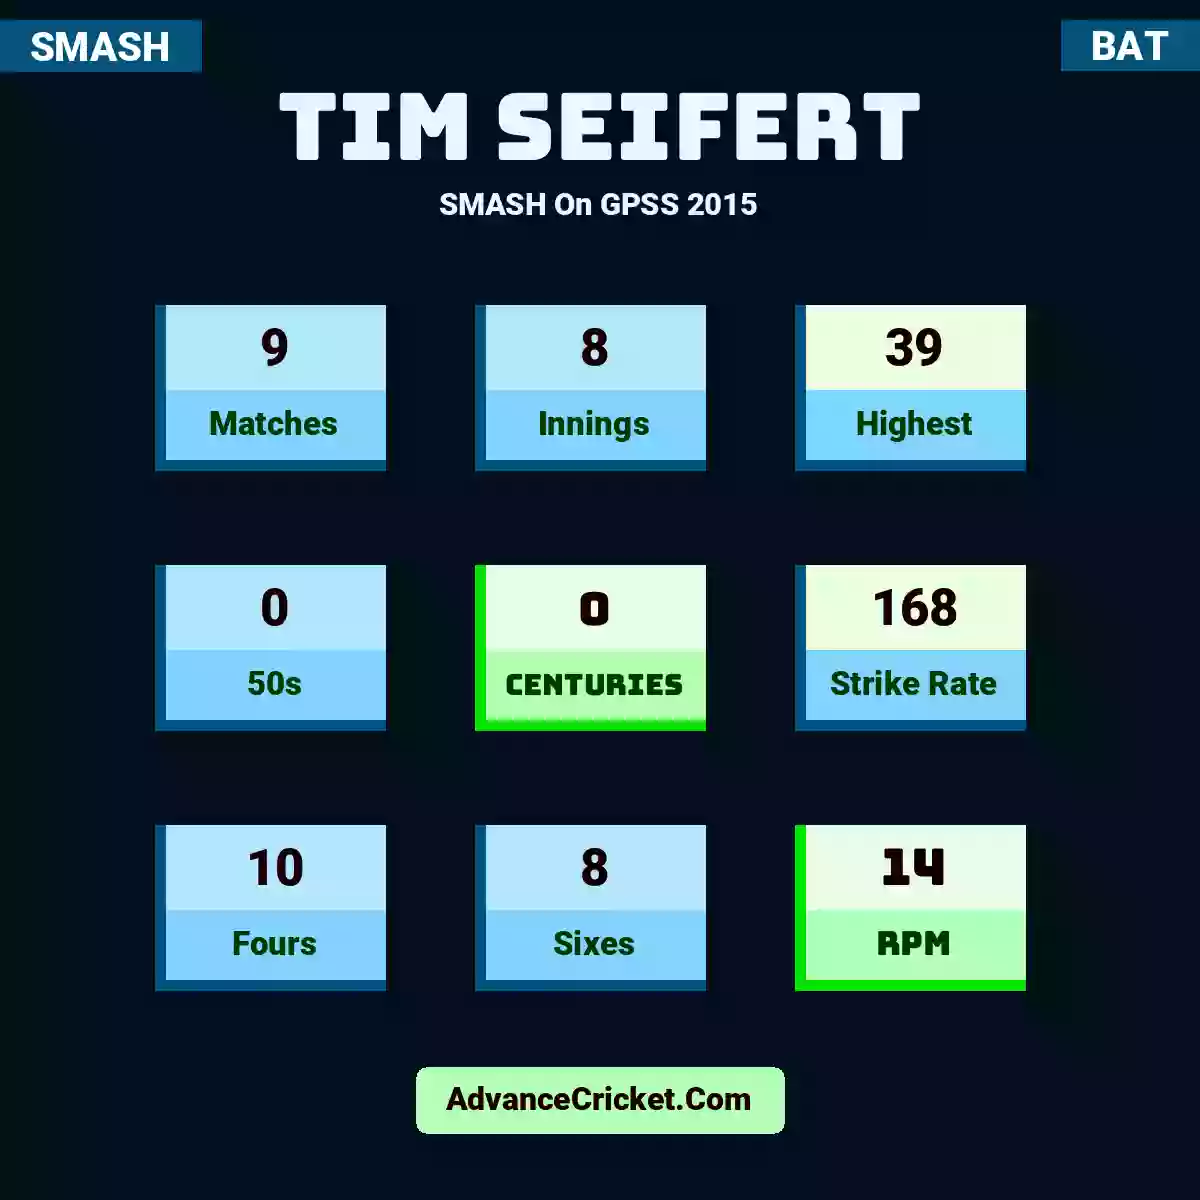 Tim Seifert SMASH  On GPSS 2015, Tim Seifert played 9 matches, scored 39 runs as highest, 0 half-centuries, and 0 centuries, with a strike rate of 168. T.Seifert hit 10 fours and 8 sixes, with an RPM of 14.